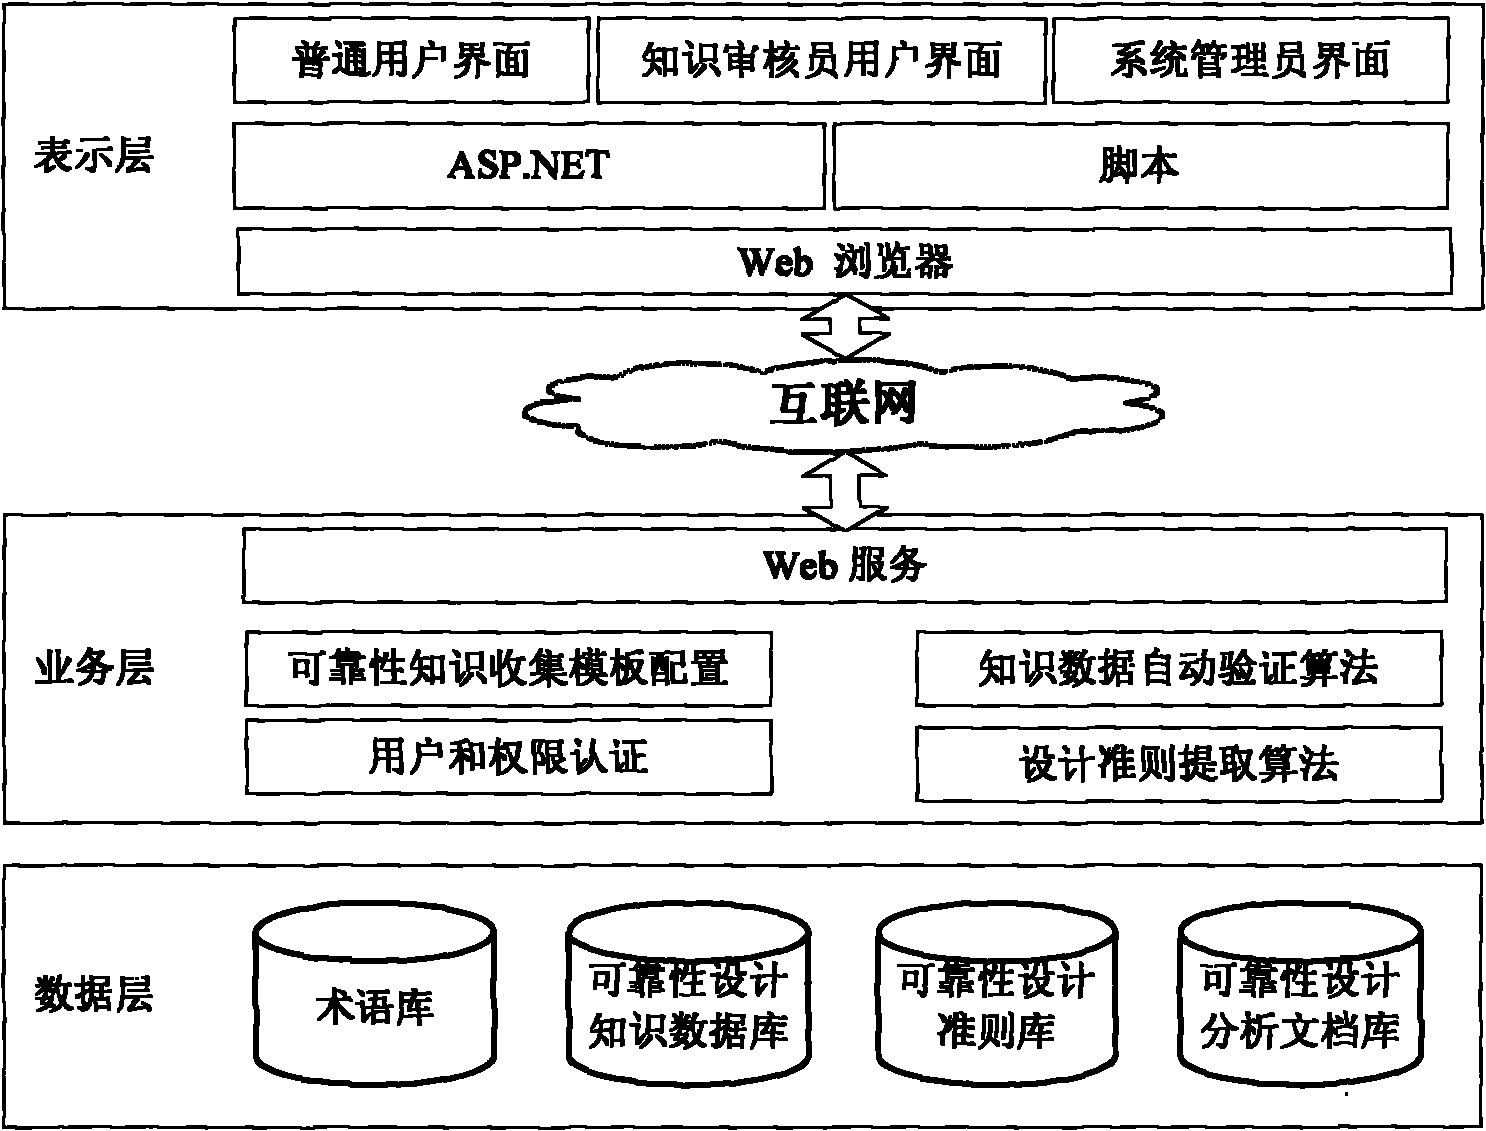 Knowledge acquisition template for product reliability design and criteria extracting method